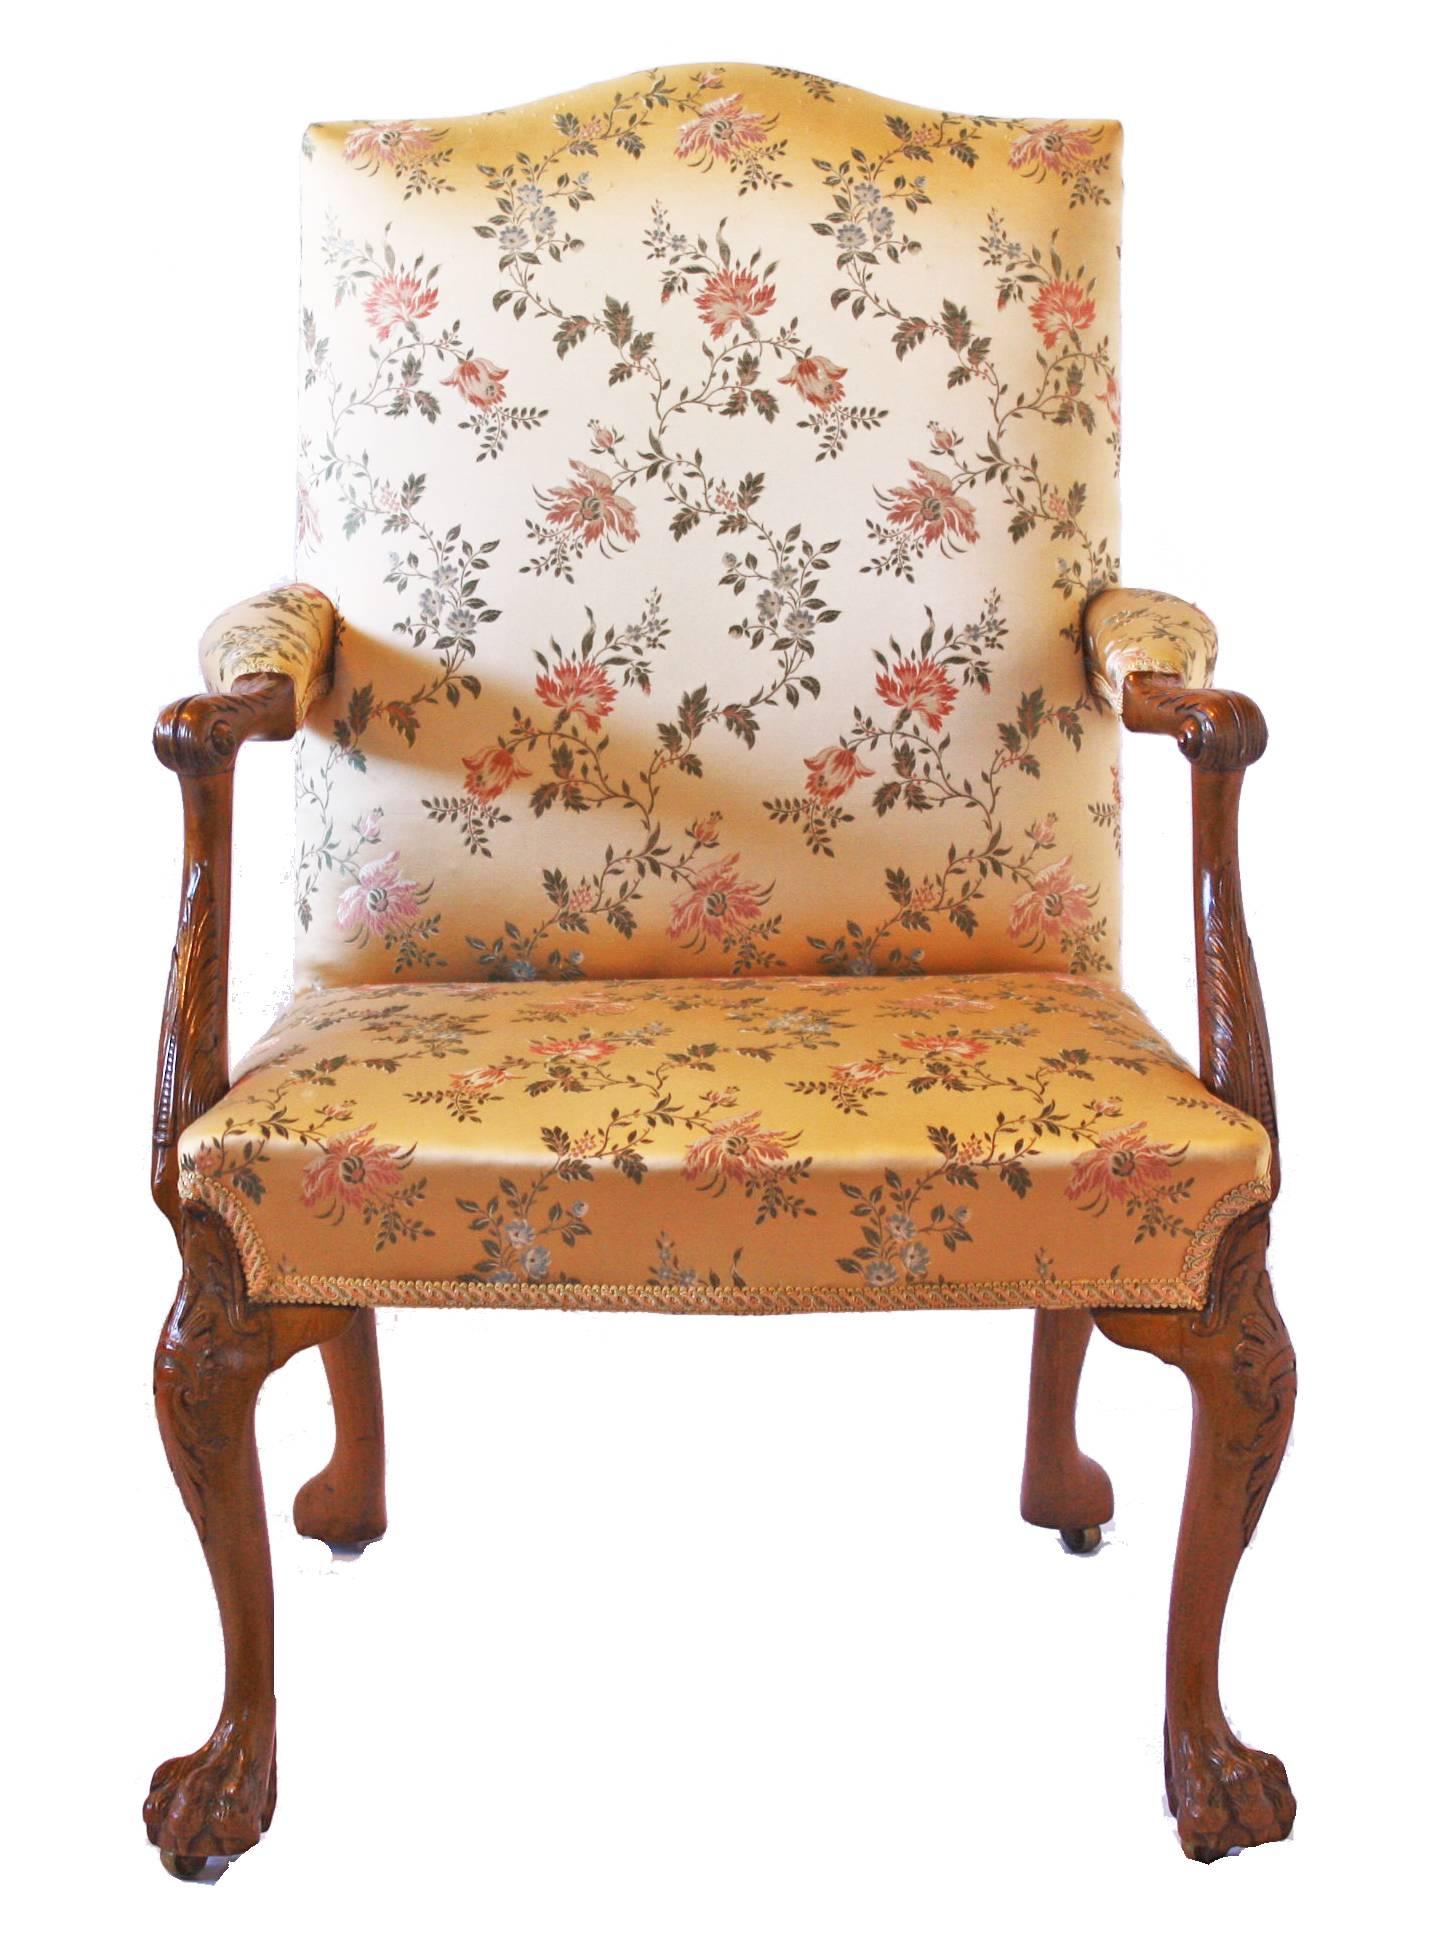 An exceedingly fine Georgian elbow chair in a light golden walnut with hairy paw feet (later castors) and crown and acanthus carving on the front legs and finely detailed acanthus carving on the arms. The seat and back are upholstered and pleasingly